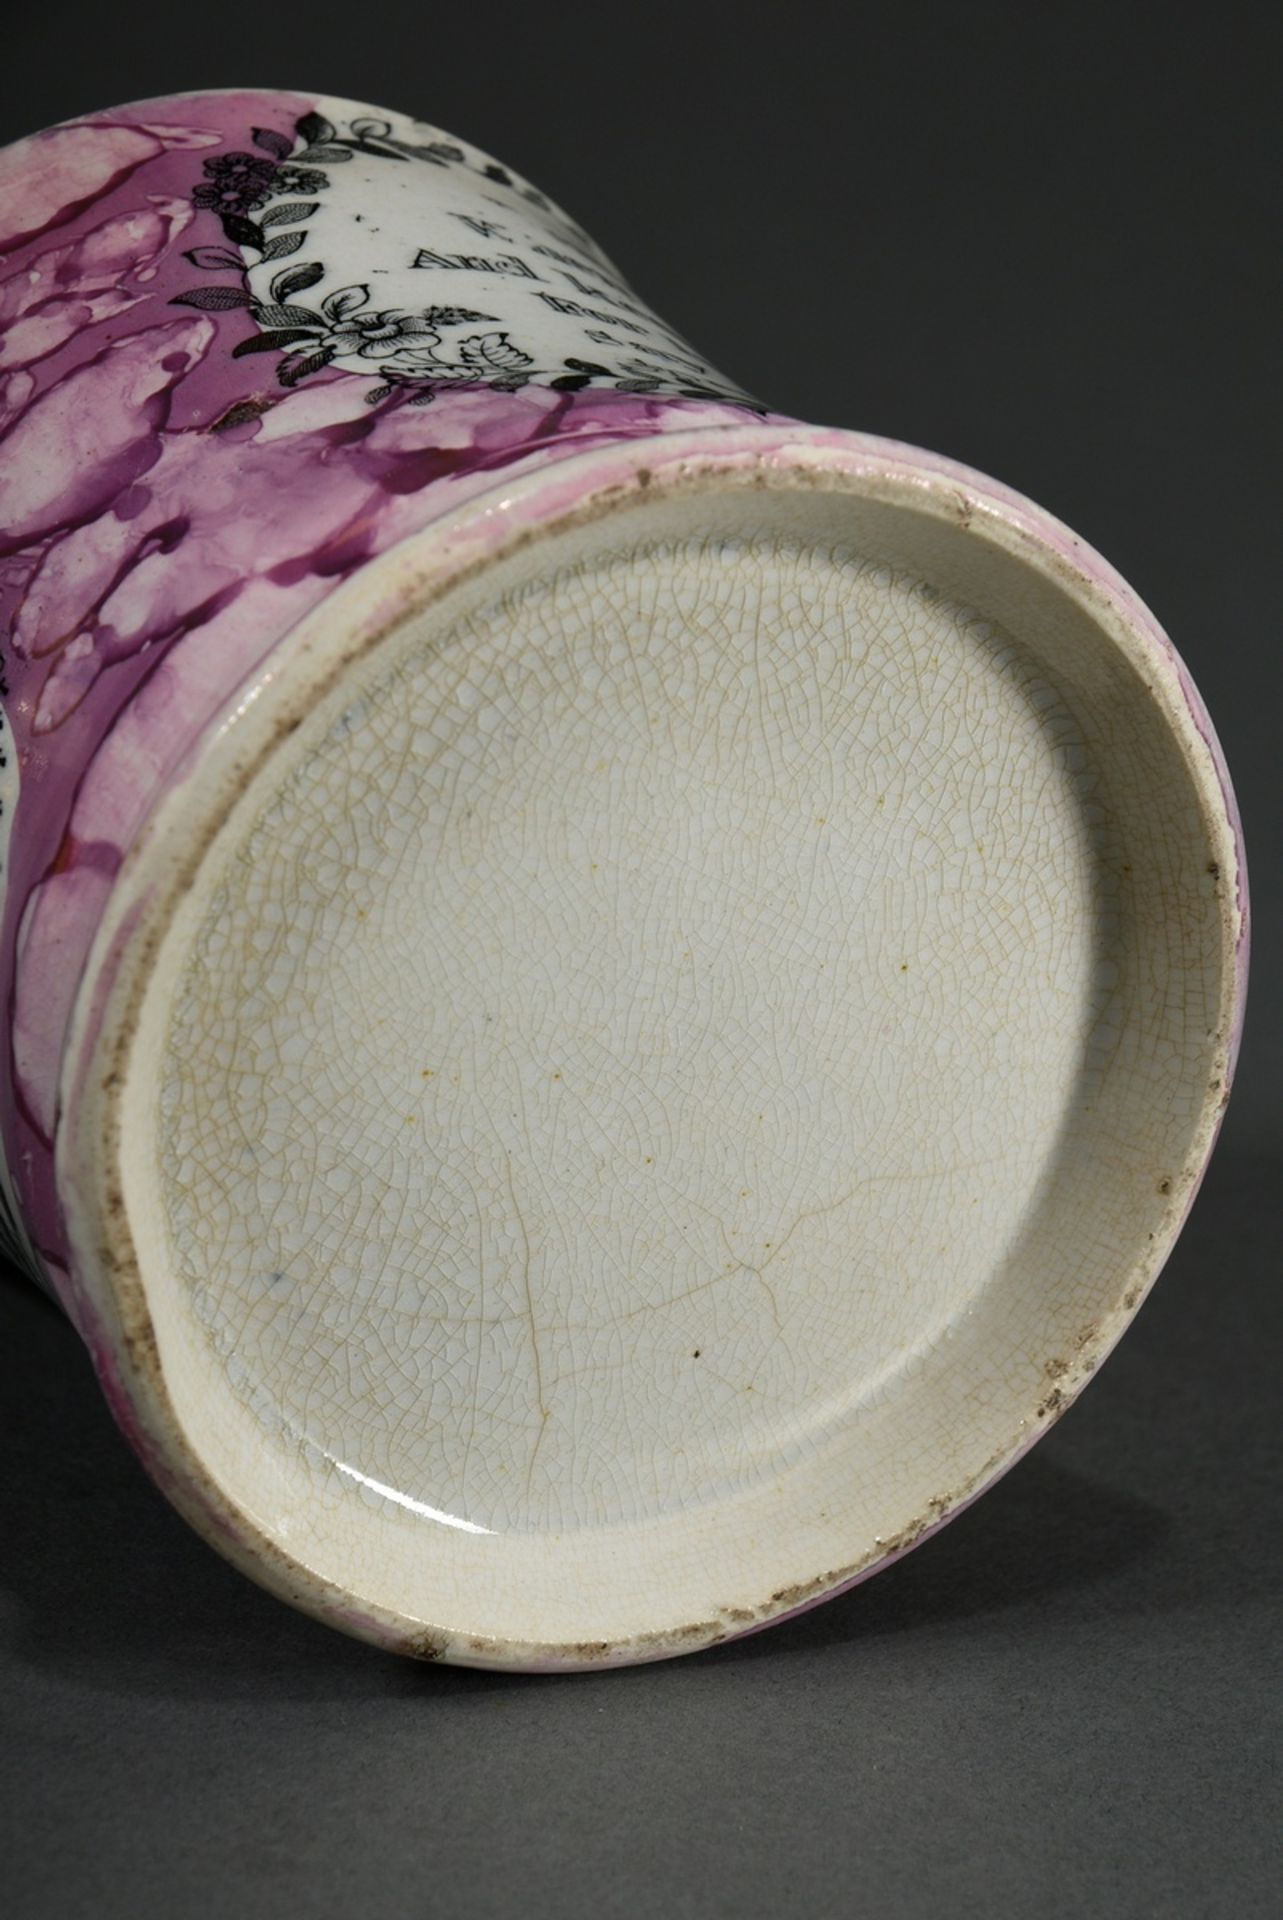 Faience drinking cup with luster and print decoration "Freemason symbols and English text", violet  - Image 6 of 6